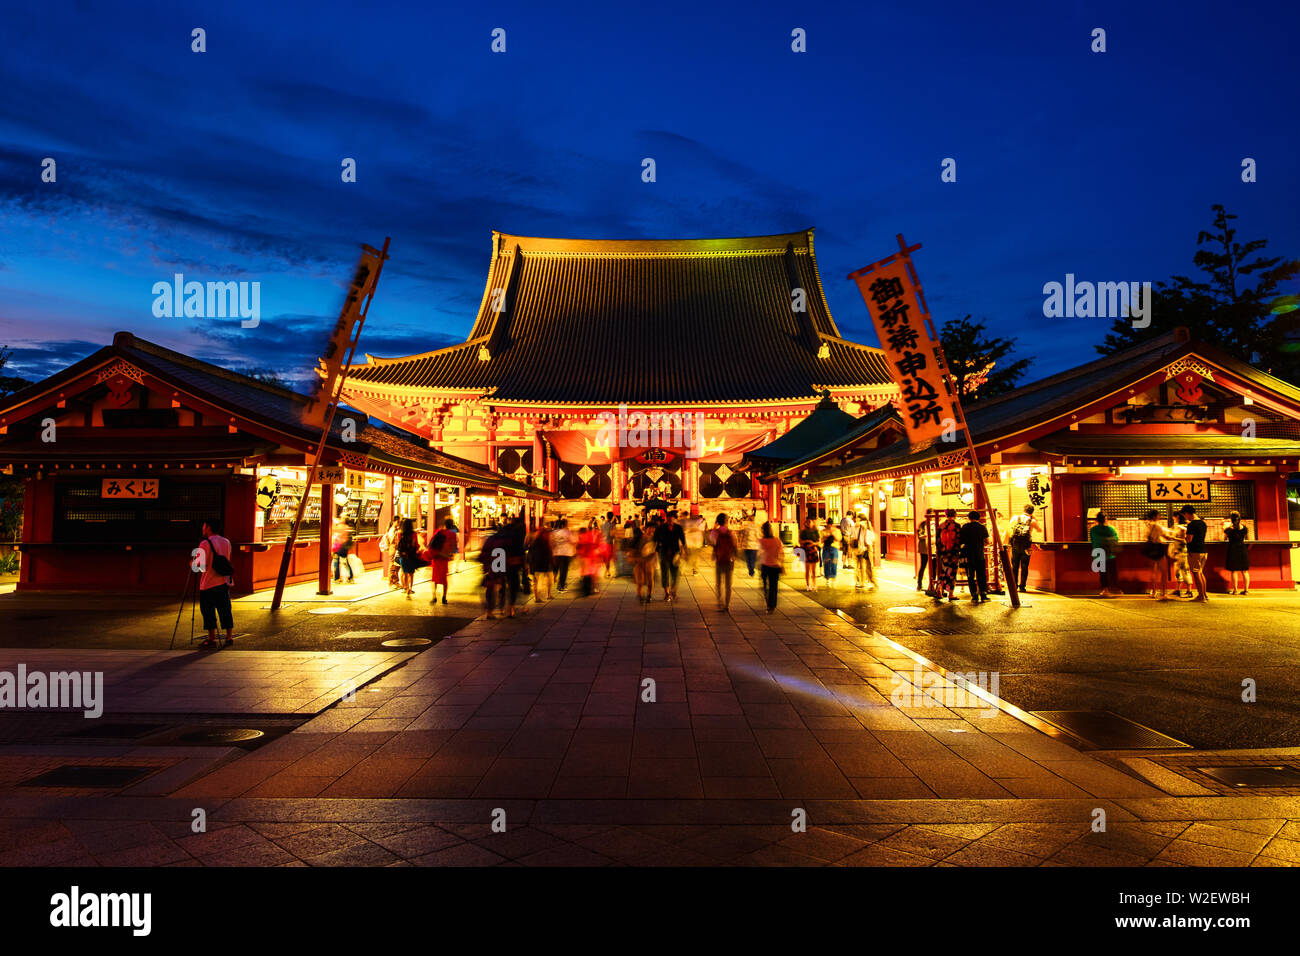 TOKYO, JAPAN - AUGUST 6, 2018: Senso - ji Buddhist temple is the oldest temple in Tokyo, Japan. Night view with colorful sunset sky. People visiting t Stock Photo